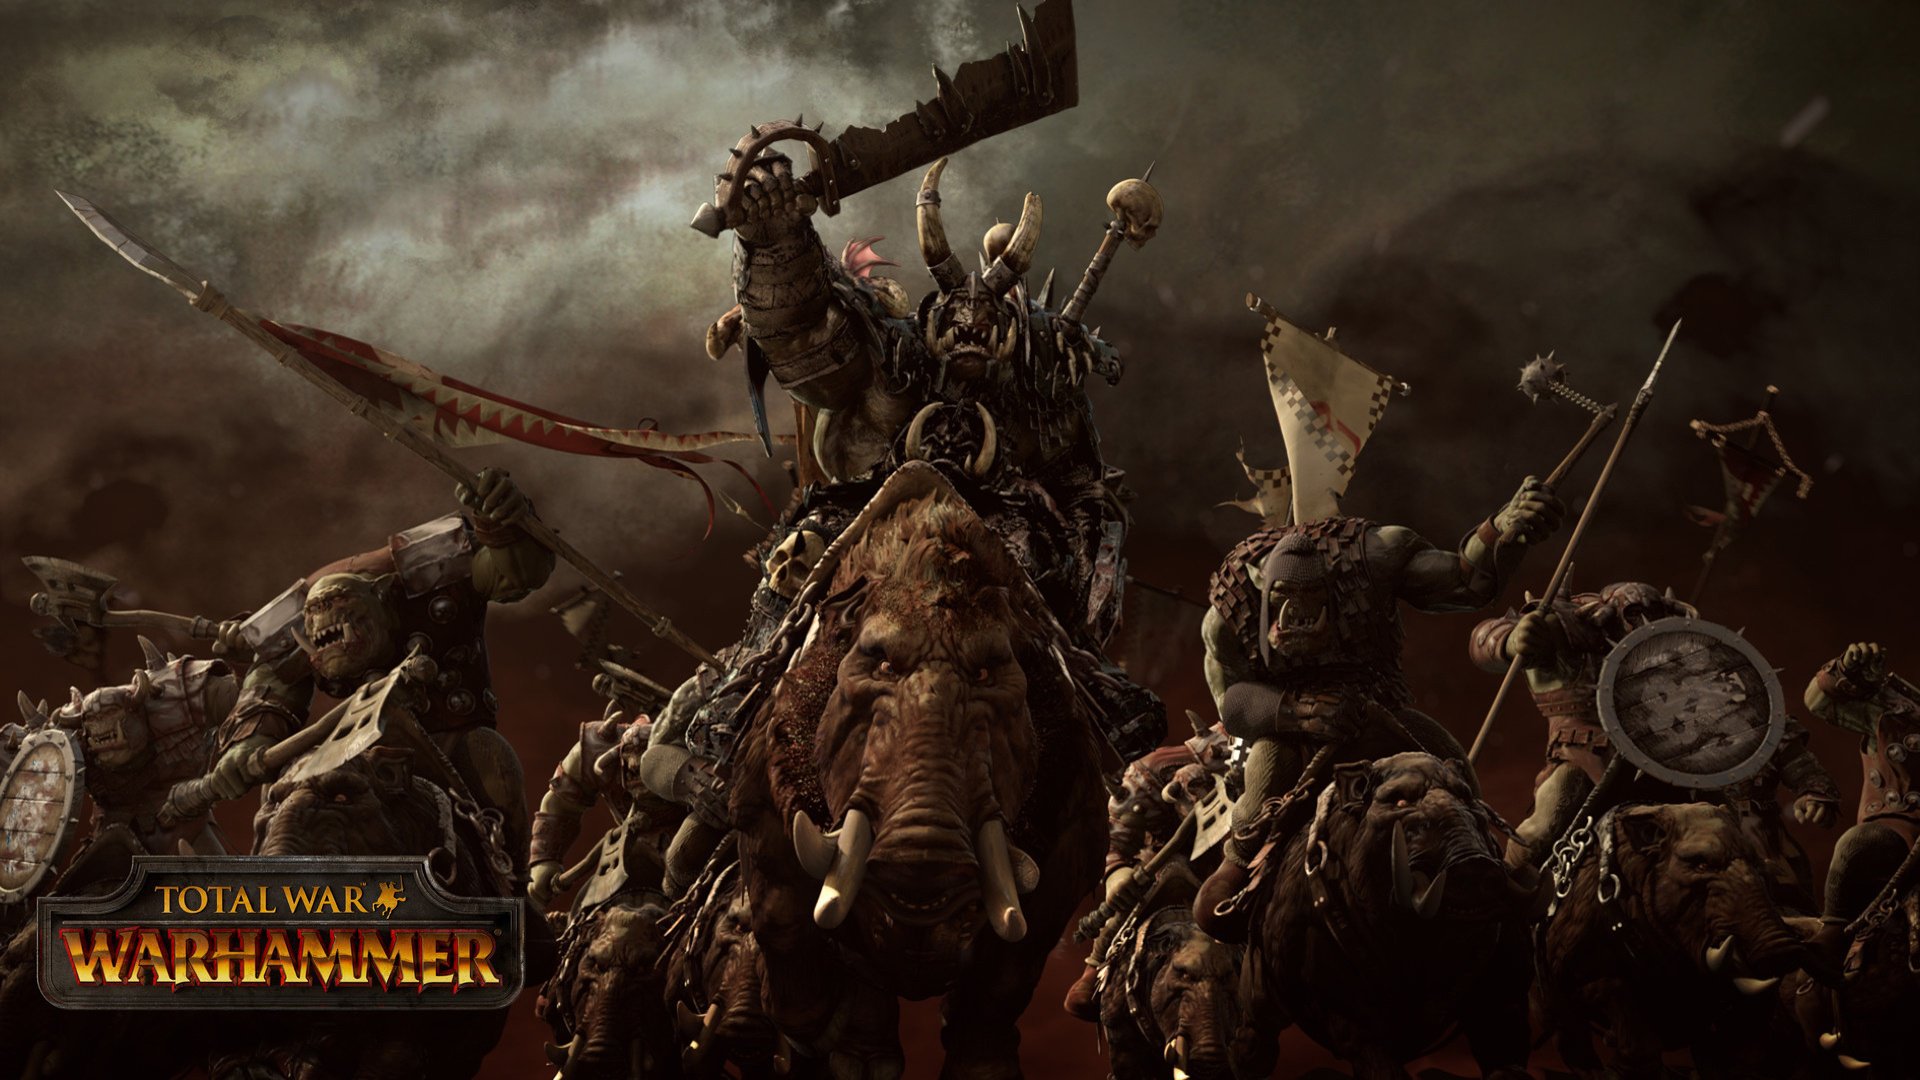  total war warhammer wallpapers games wallpapers pc games wallpapers 1920x1080